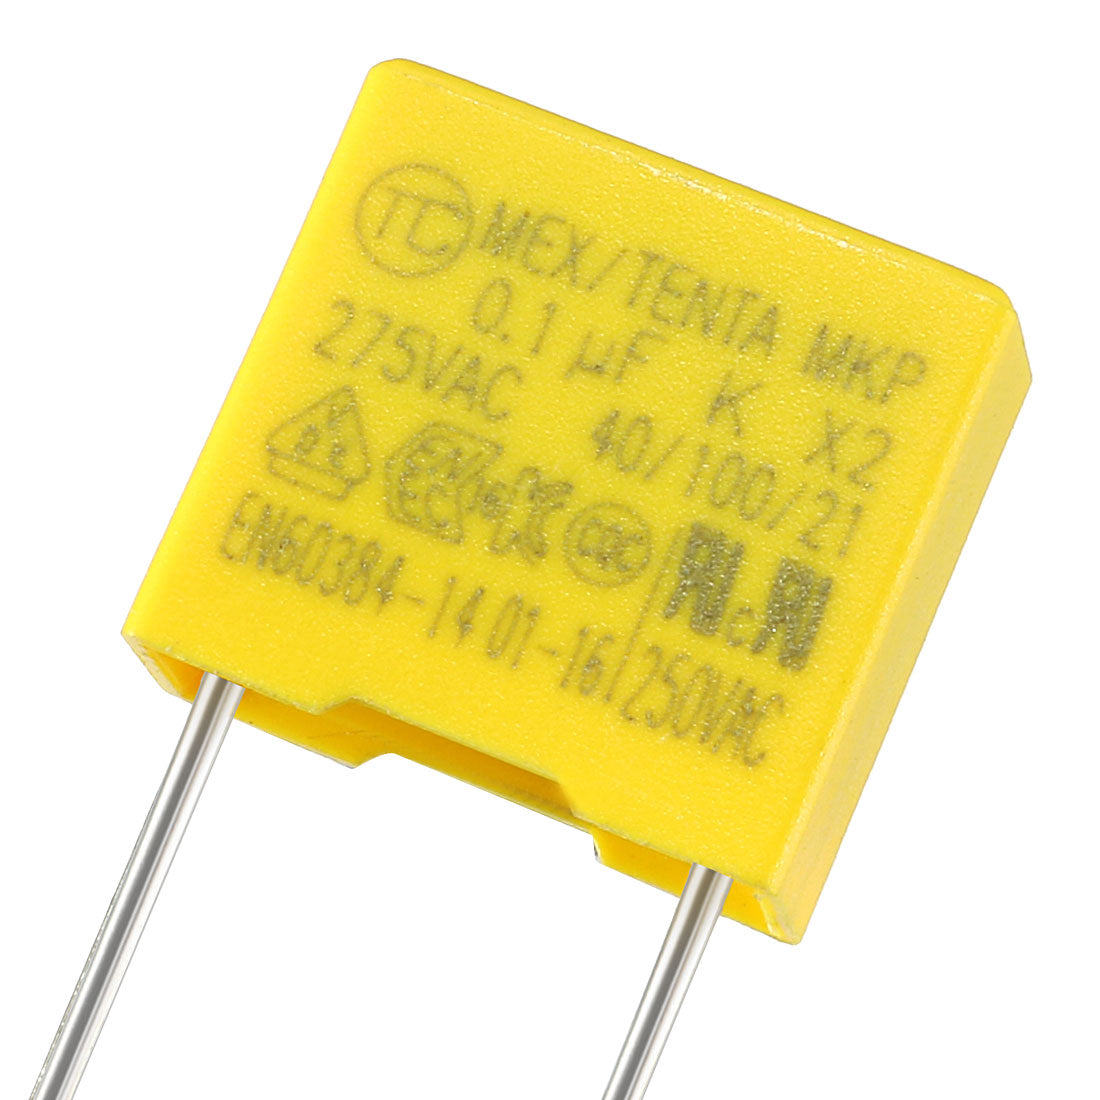 uxcell Uxcell Polypropylene Film Safety Capacitors 0.1uF 275VAC X2 MKP 20 Pcs